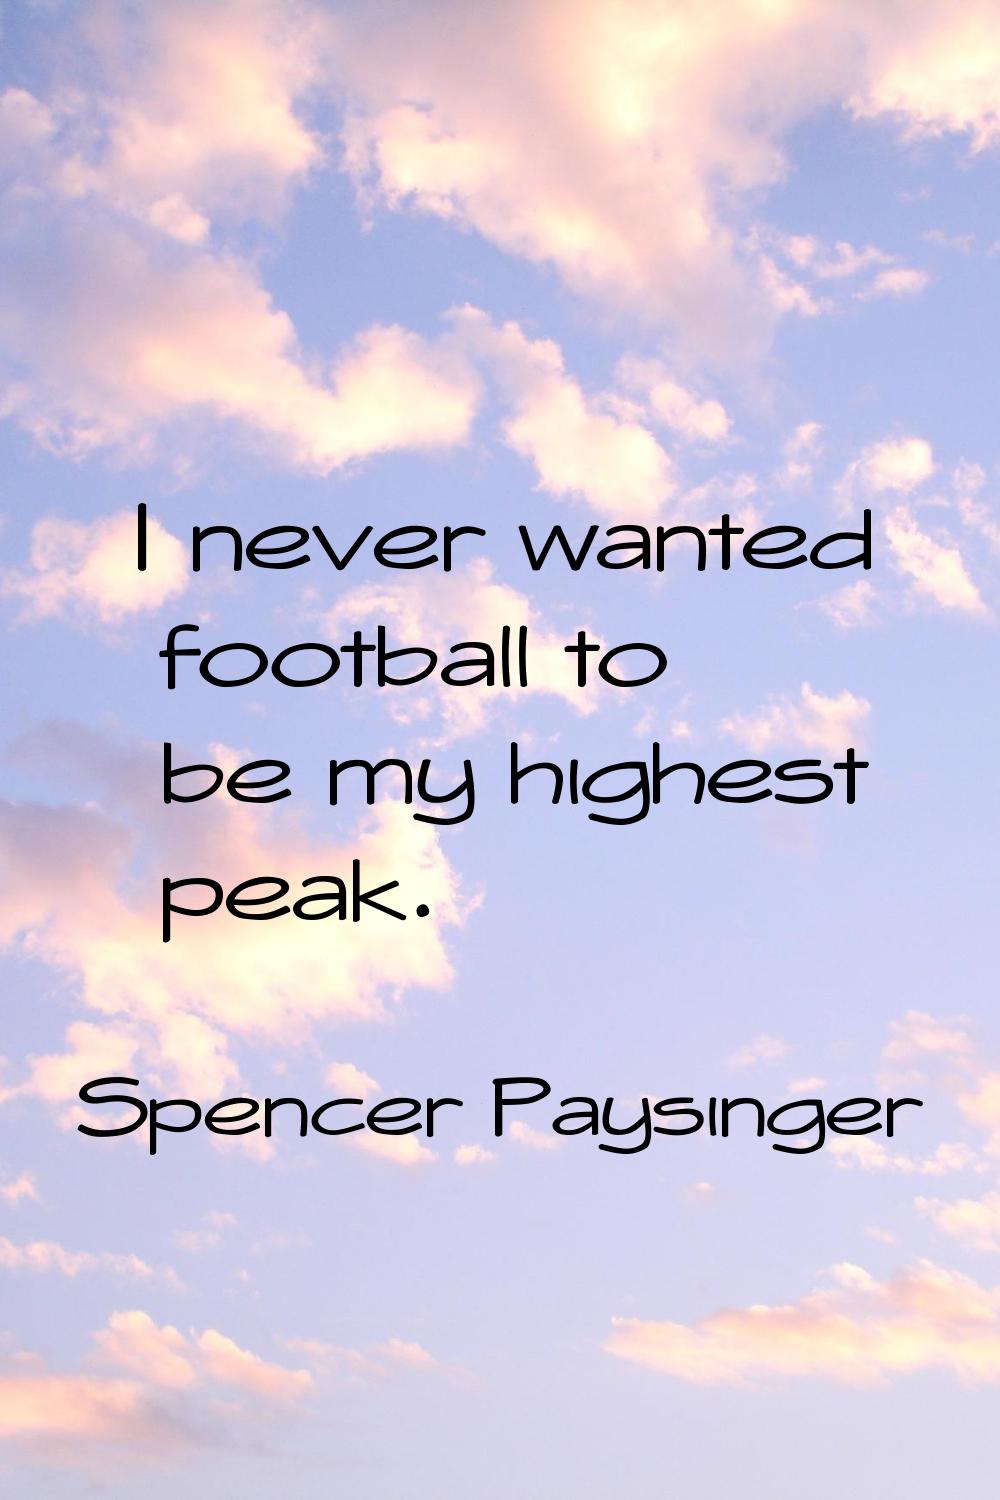 I never wanted football to be my highest peak.